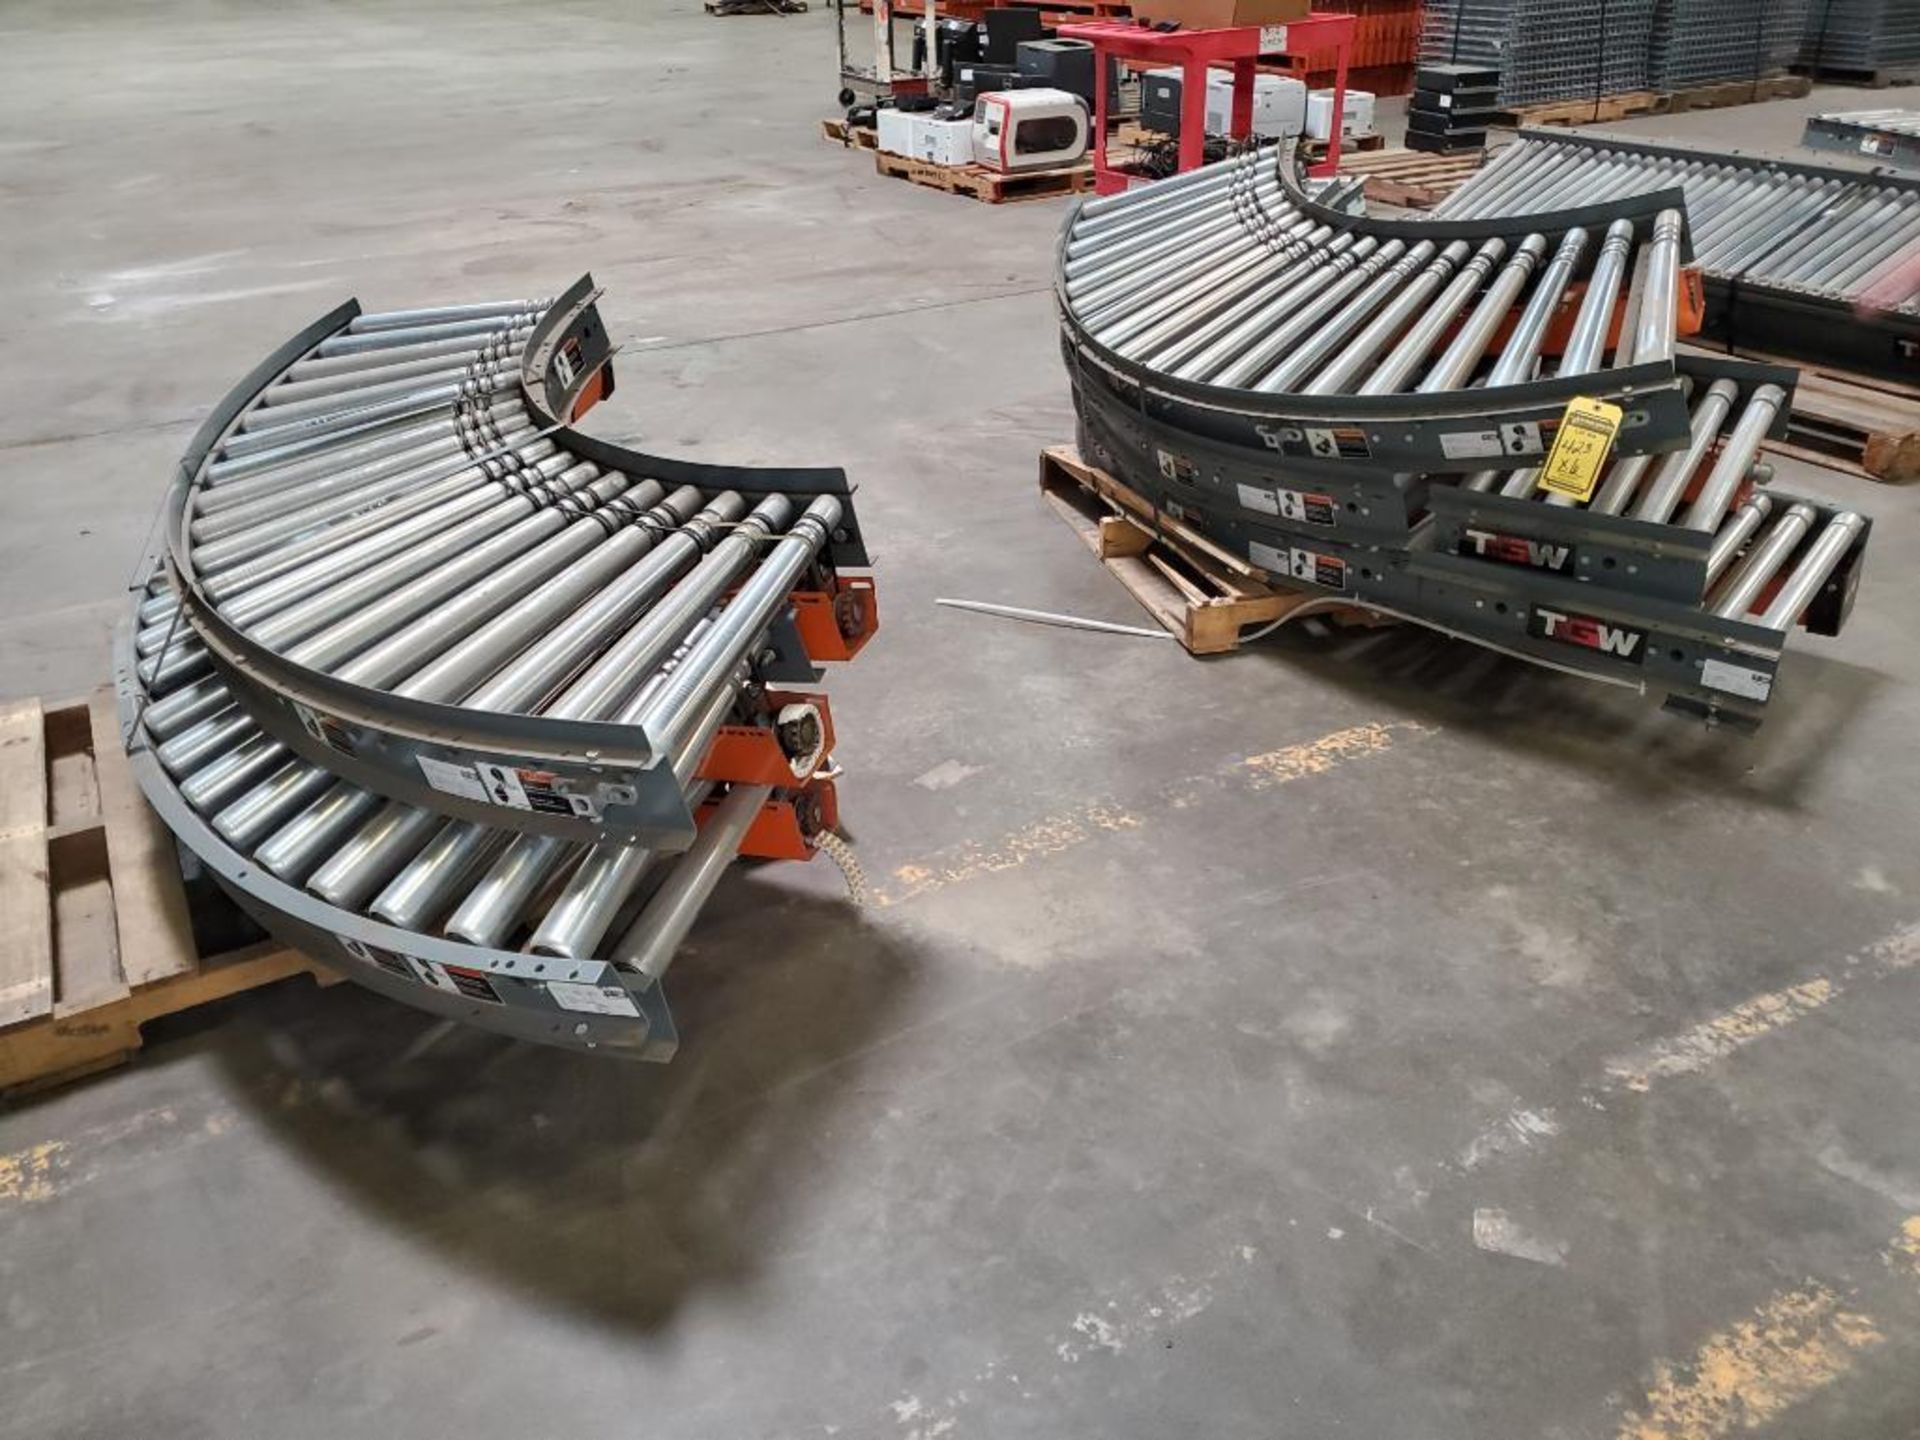 (6x) TGW Roller Conveyor, 21-1/ 2" Rollers ($25 Loading fee will be added to buyers invoice)